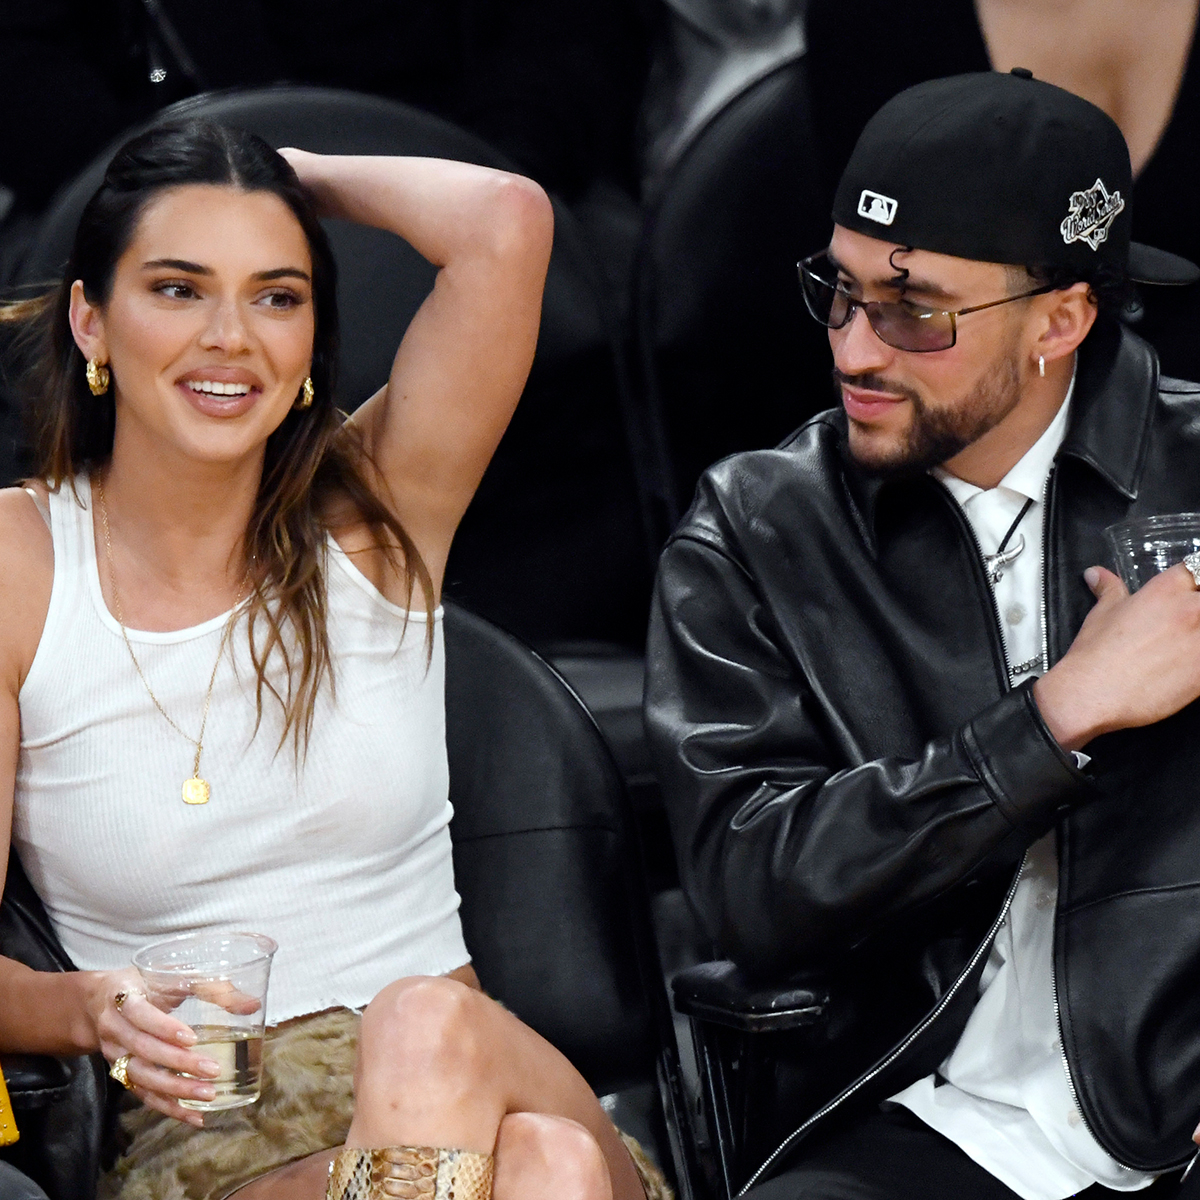 Kendall Jenner and Bad Bunny Break Up After Less Than a Year of Dating